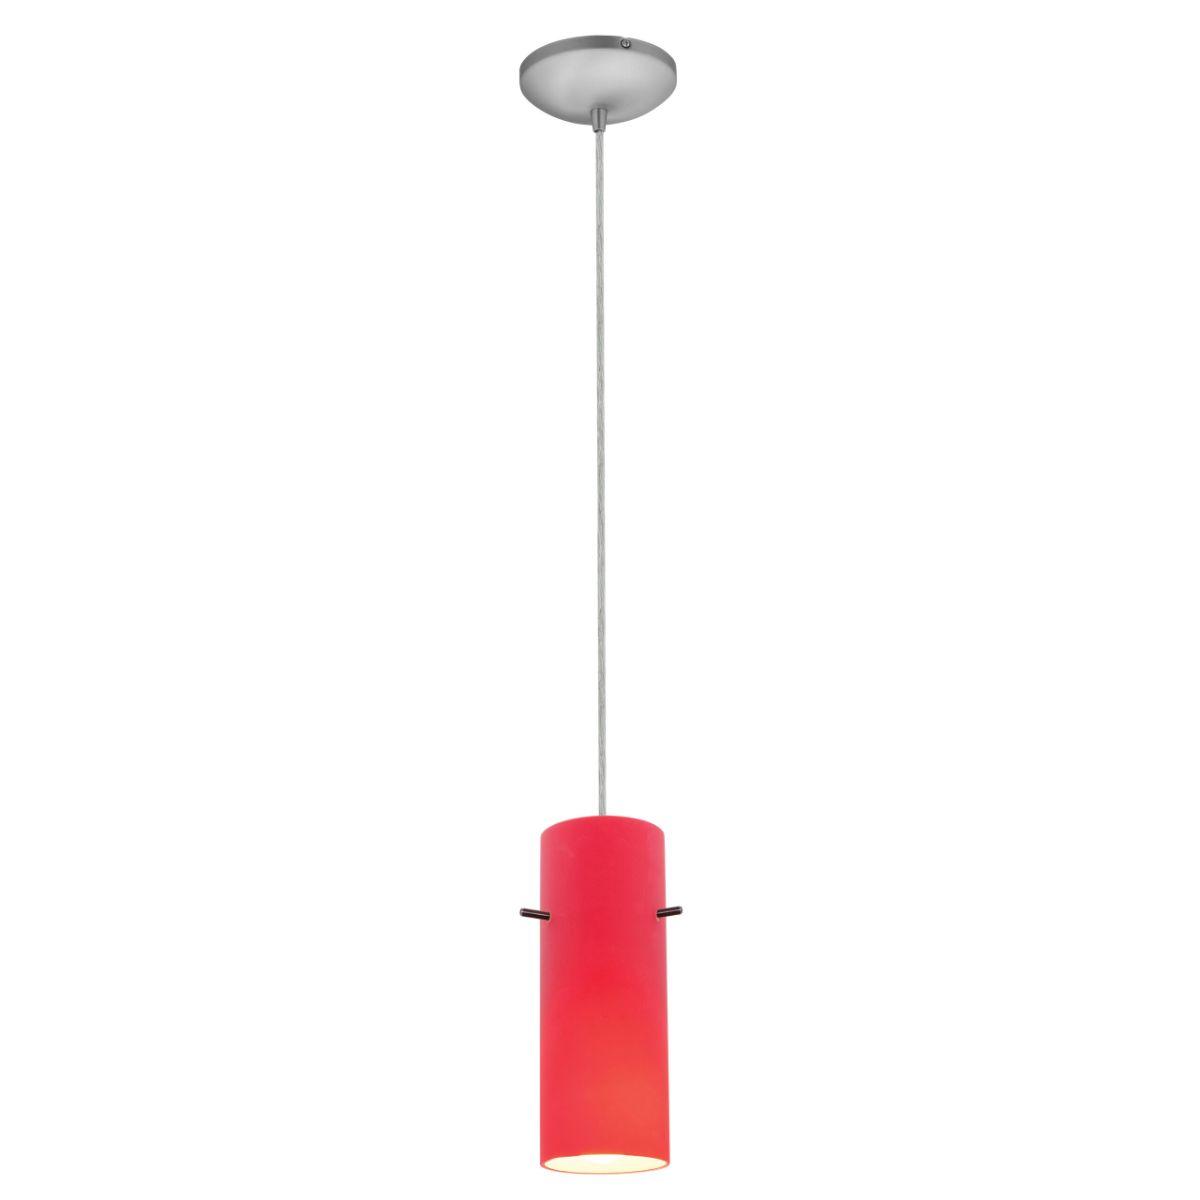 Cylinder 4 in. Pendant Light, Red Glass - Bees Lighting